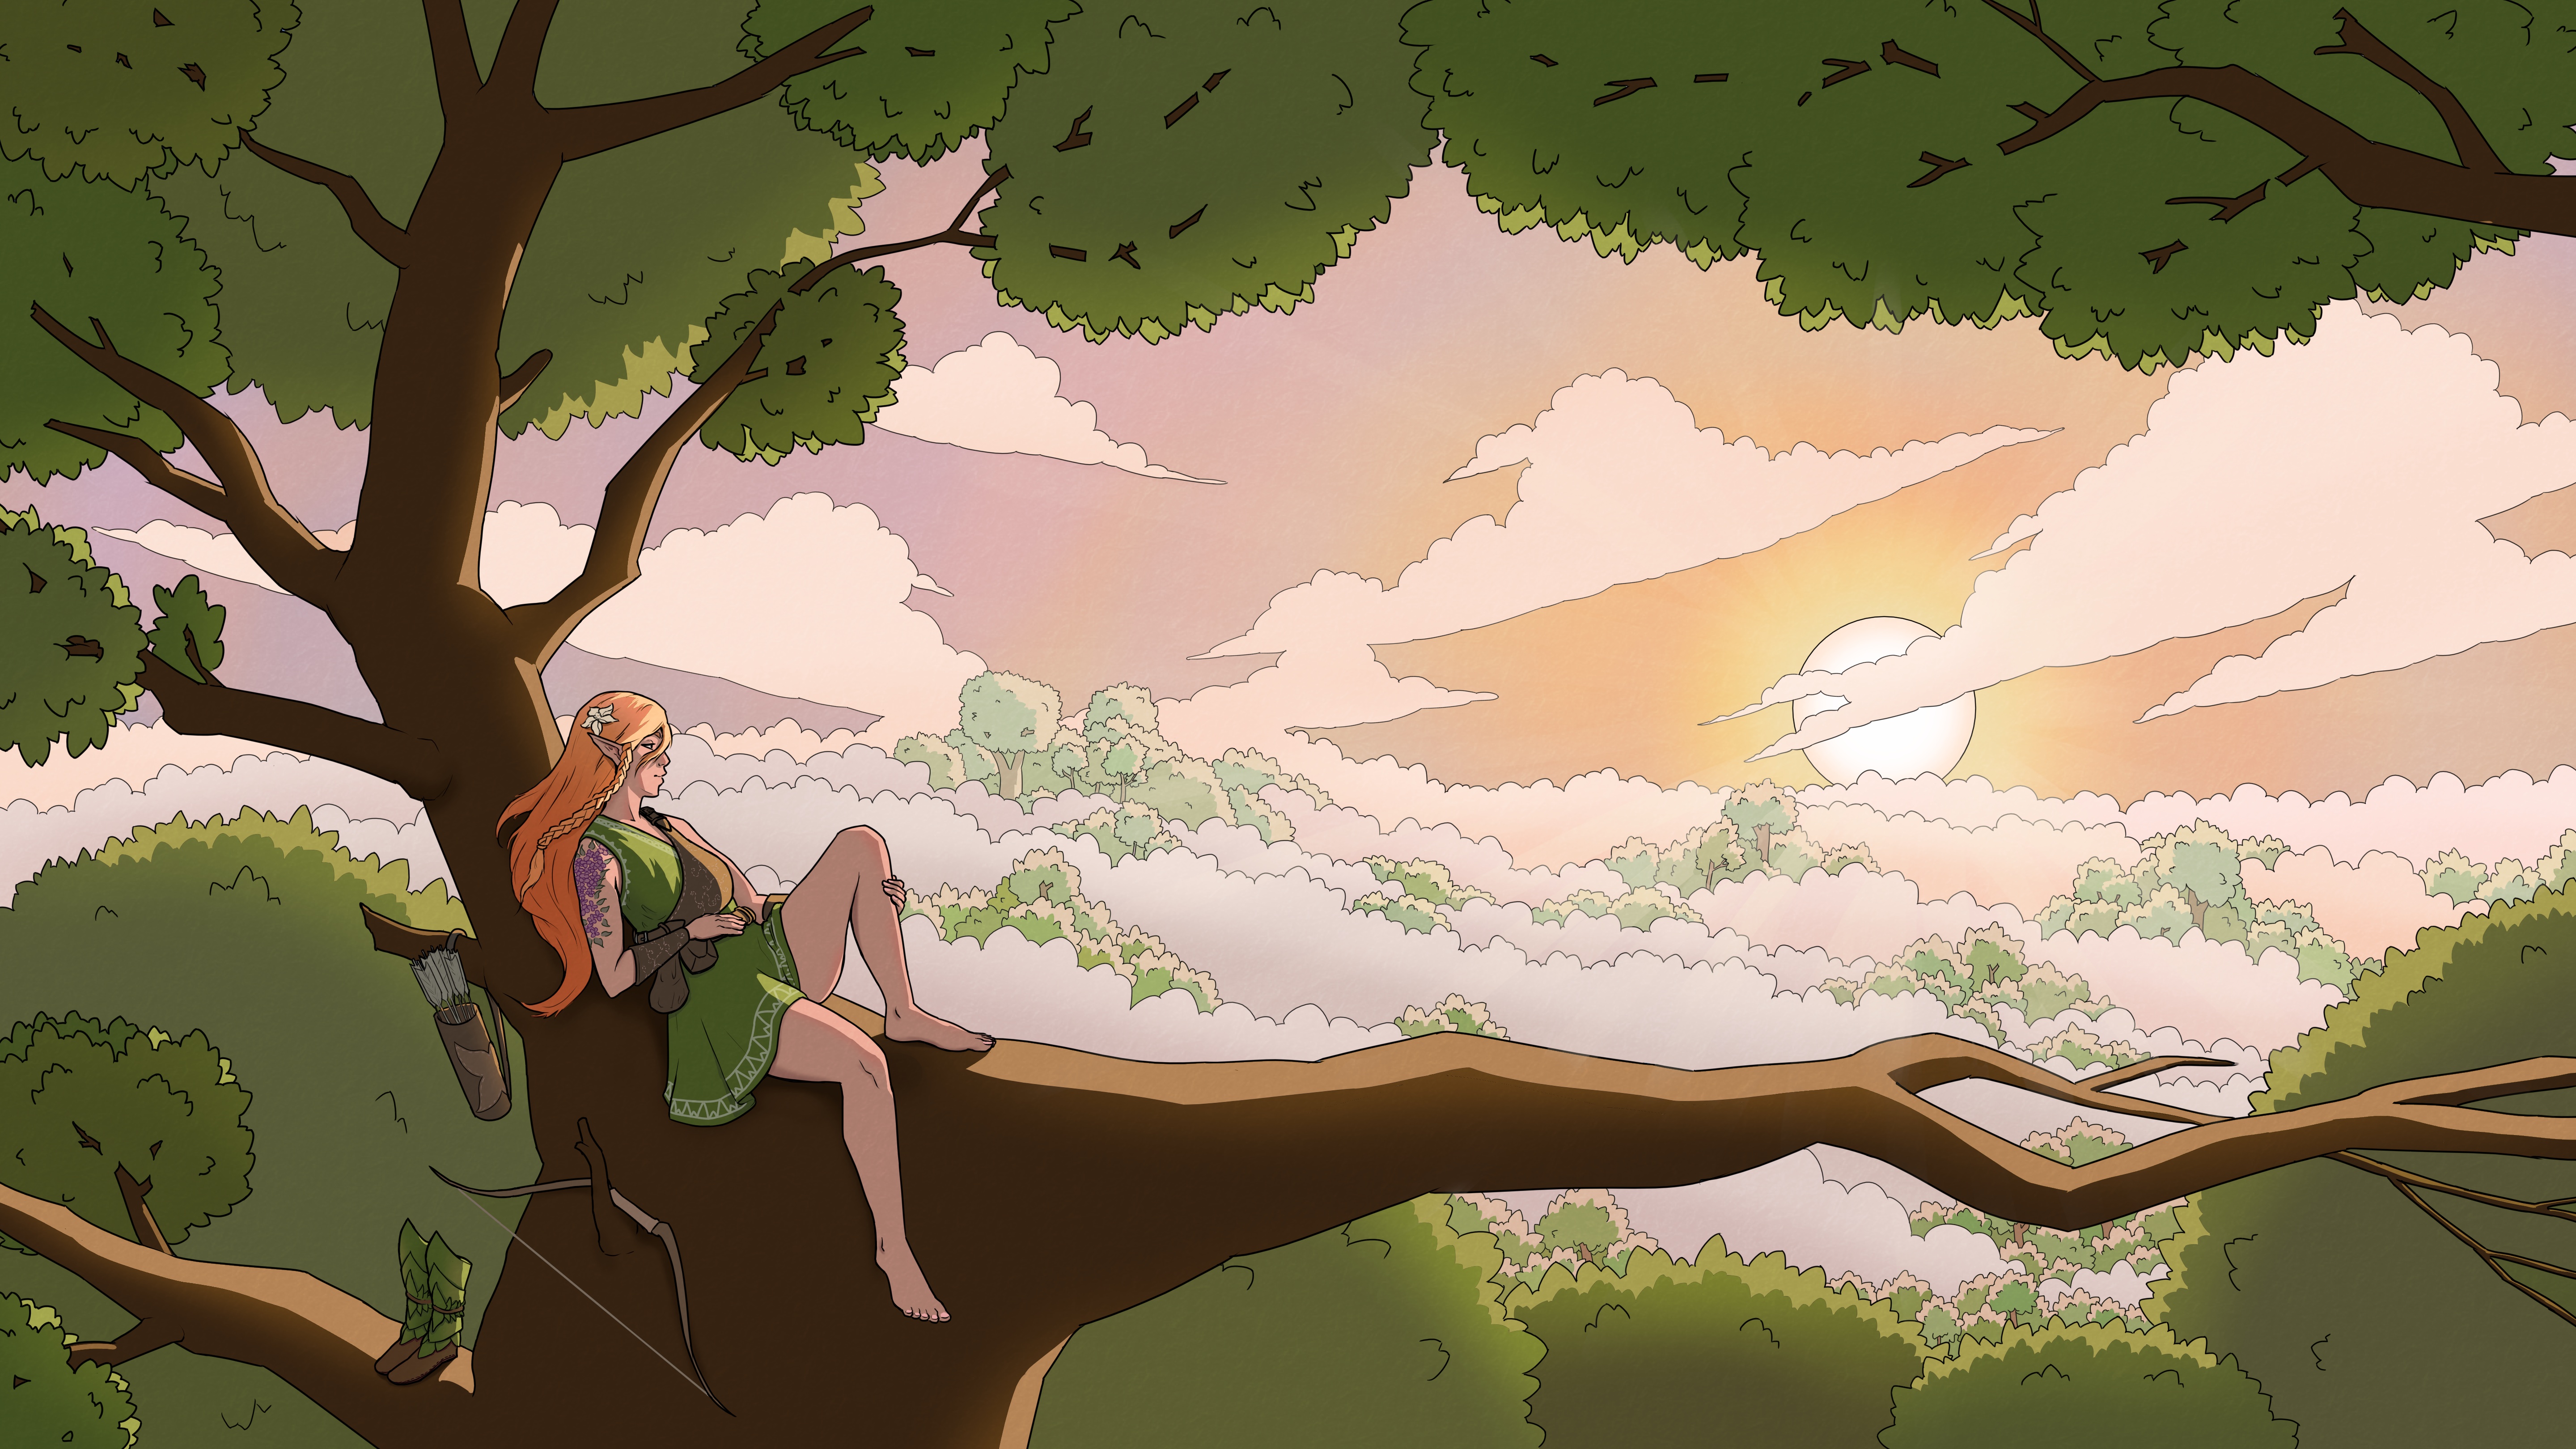 Digital drawing of a foggy forest at sunset,
viewed from the top branches of a tall tree.
A redheaded elven woman wearing a green tunic
with a belt and archer's chest guard sits relaxing on the branches.
Her boots, bow and quiver are hanging on the branches below her.